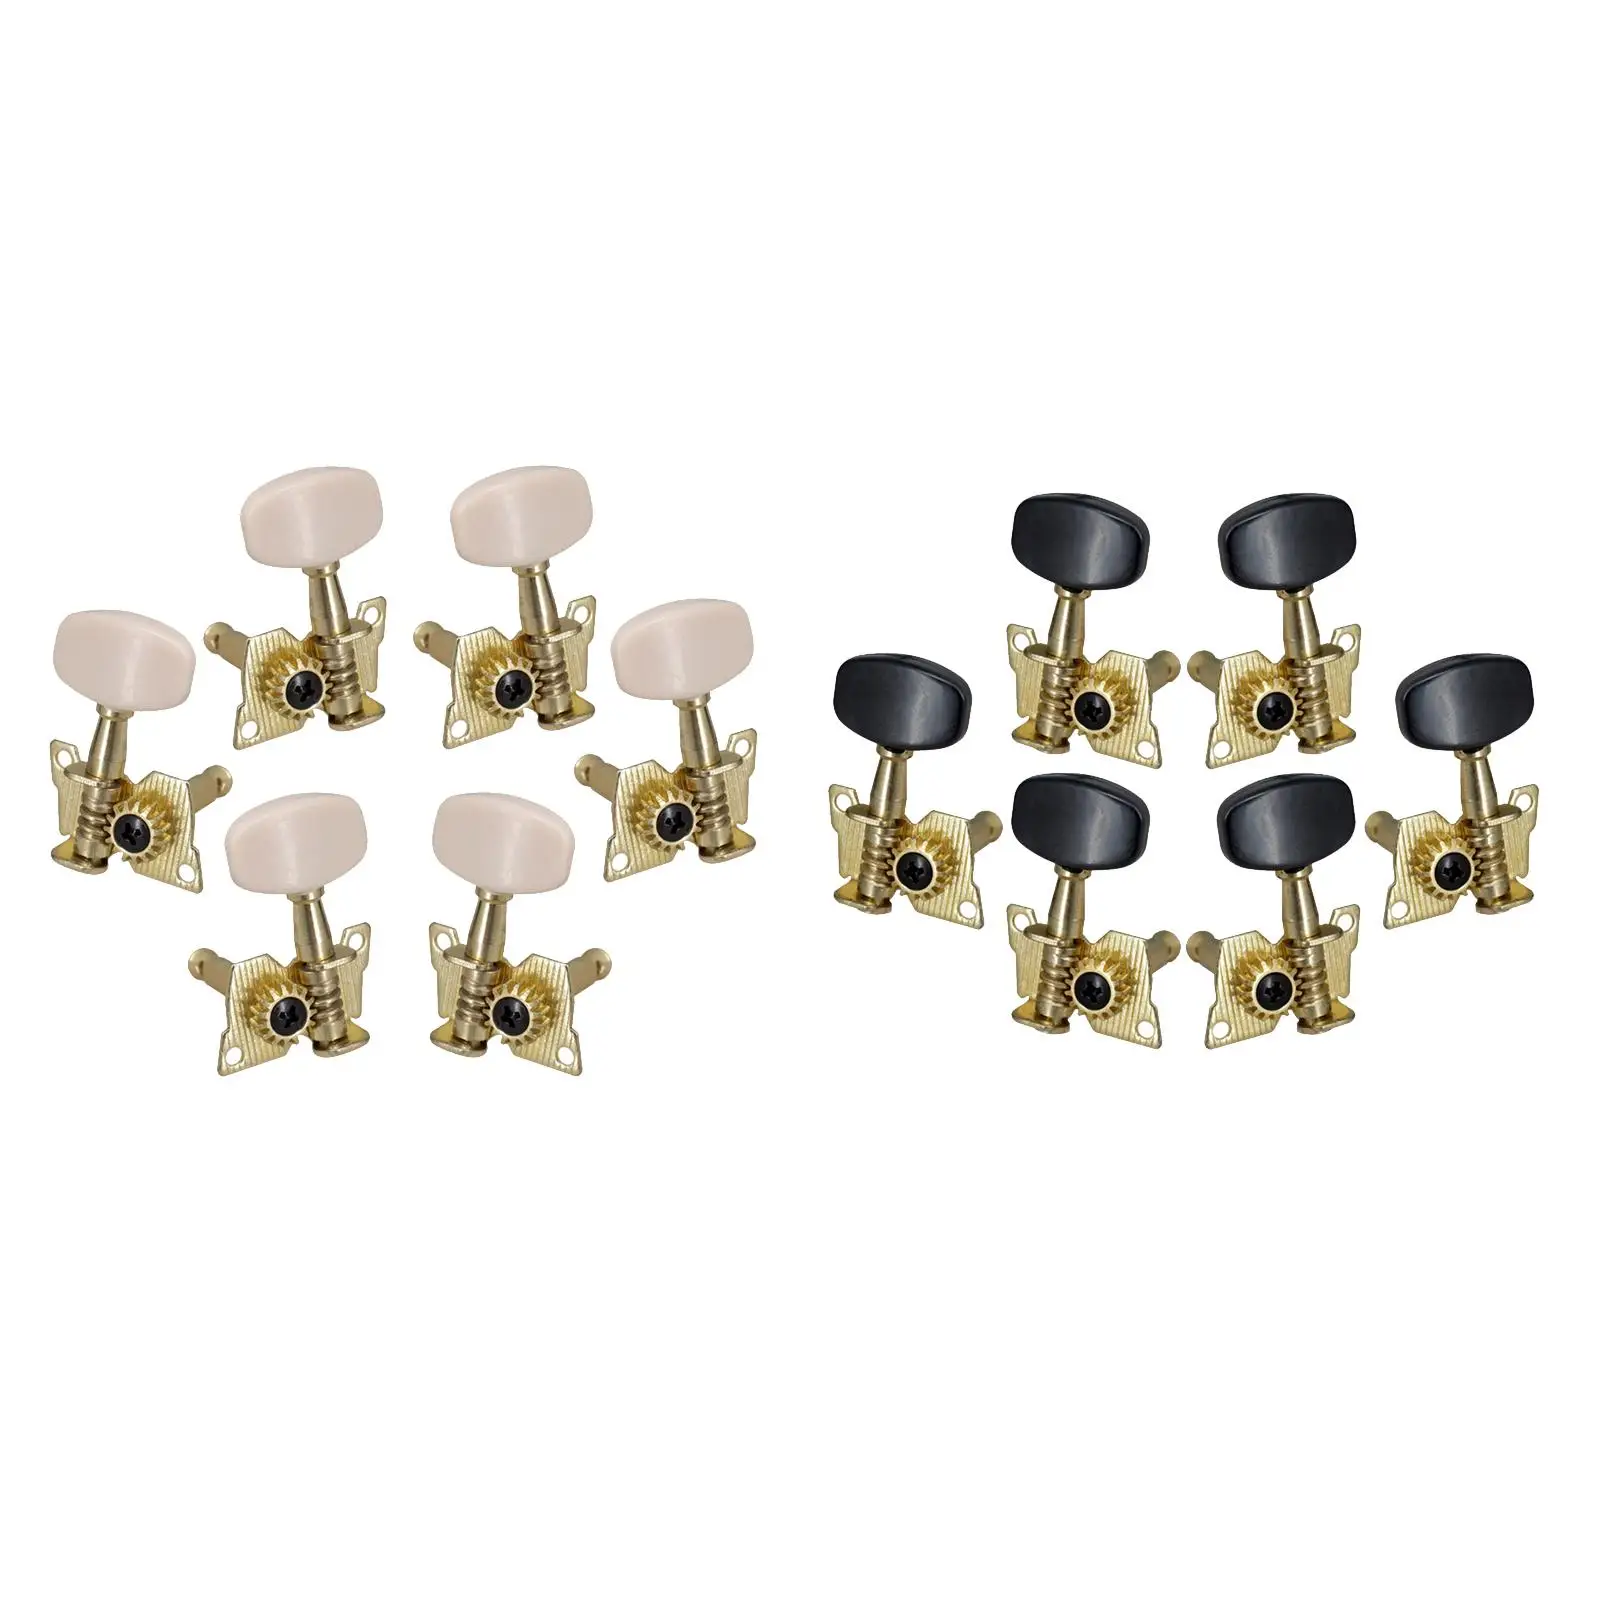 6x 3L3R Guitar Tuner Pegs Right Left Guitar Tuning Pegs for Acoustic Electric Guitar